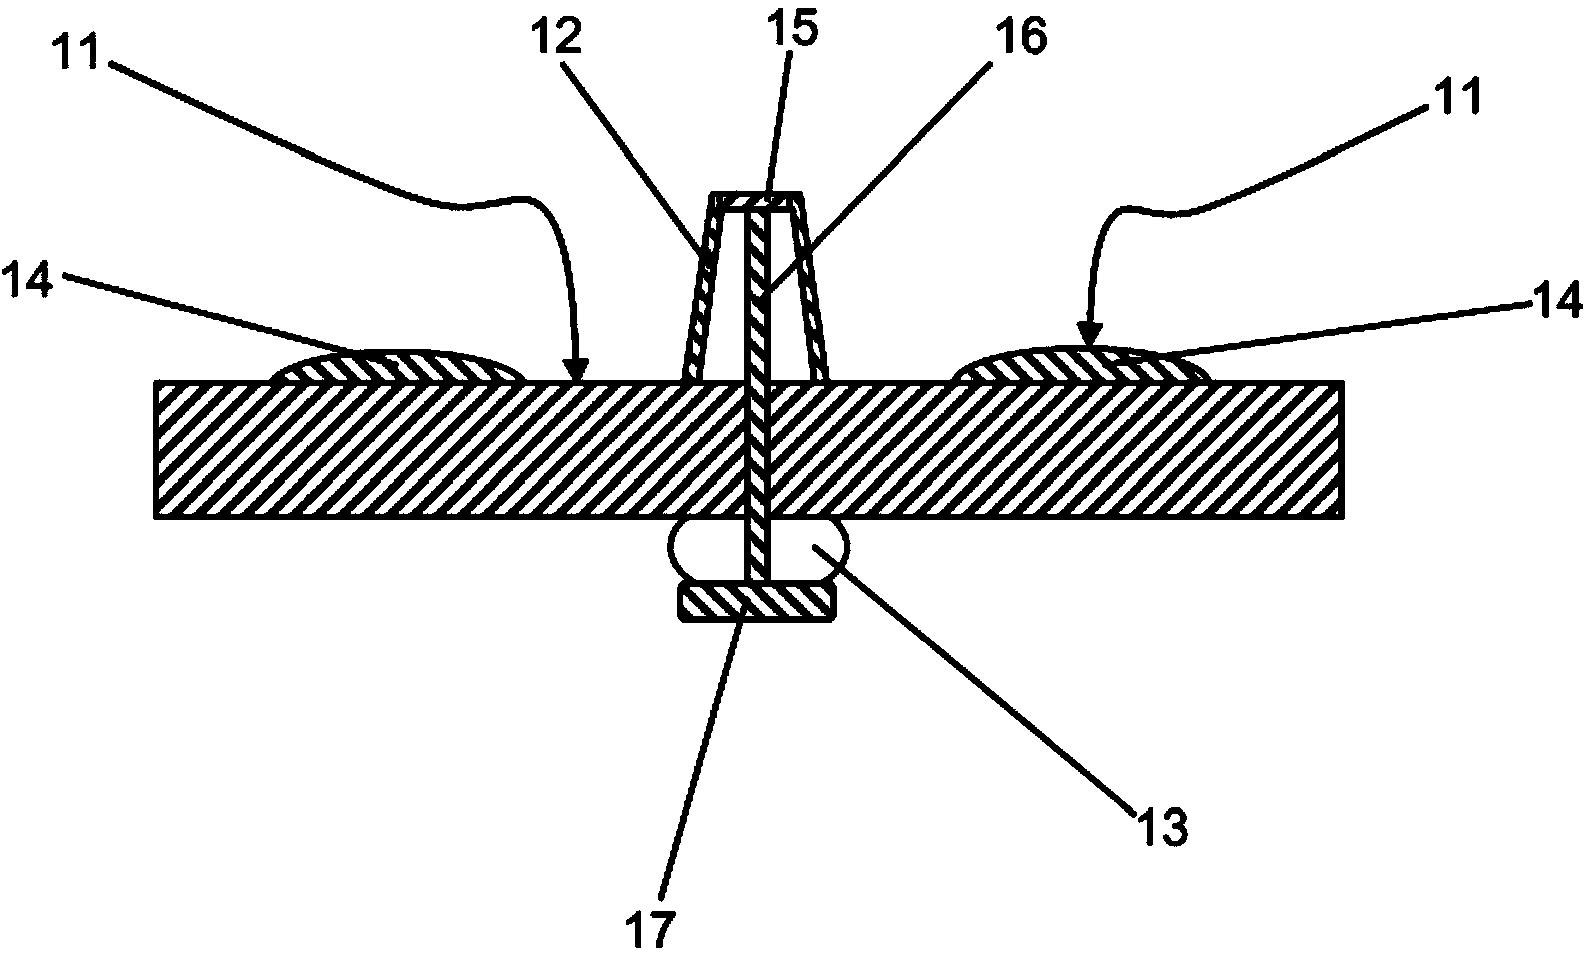 Device and method for the in-situ production of articulating spacers